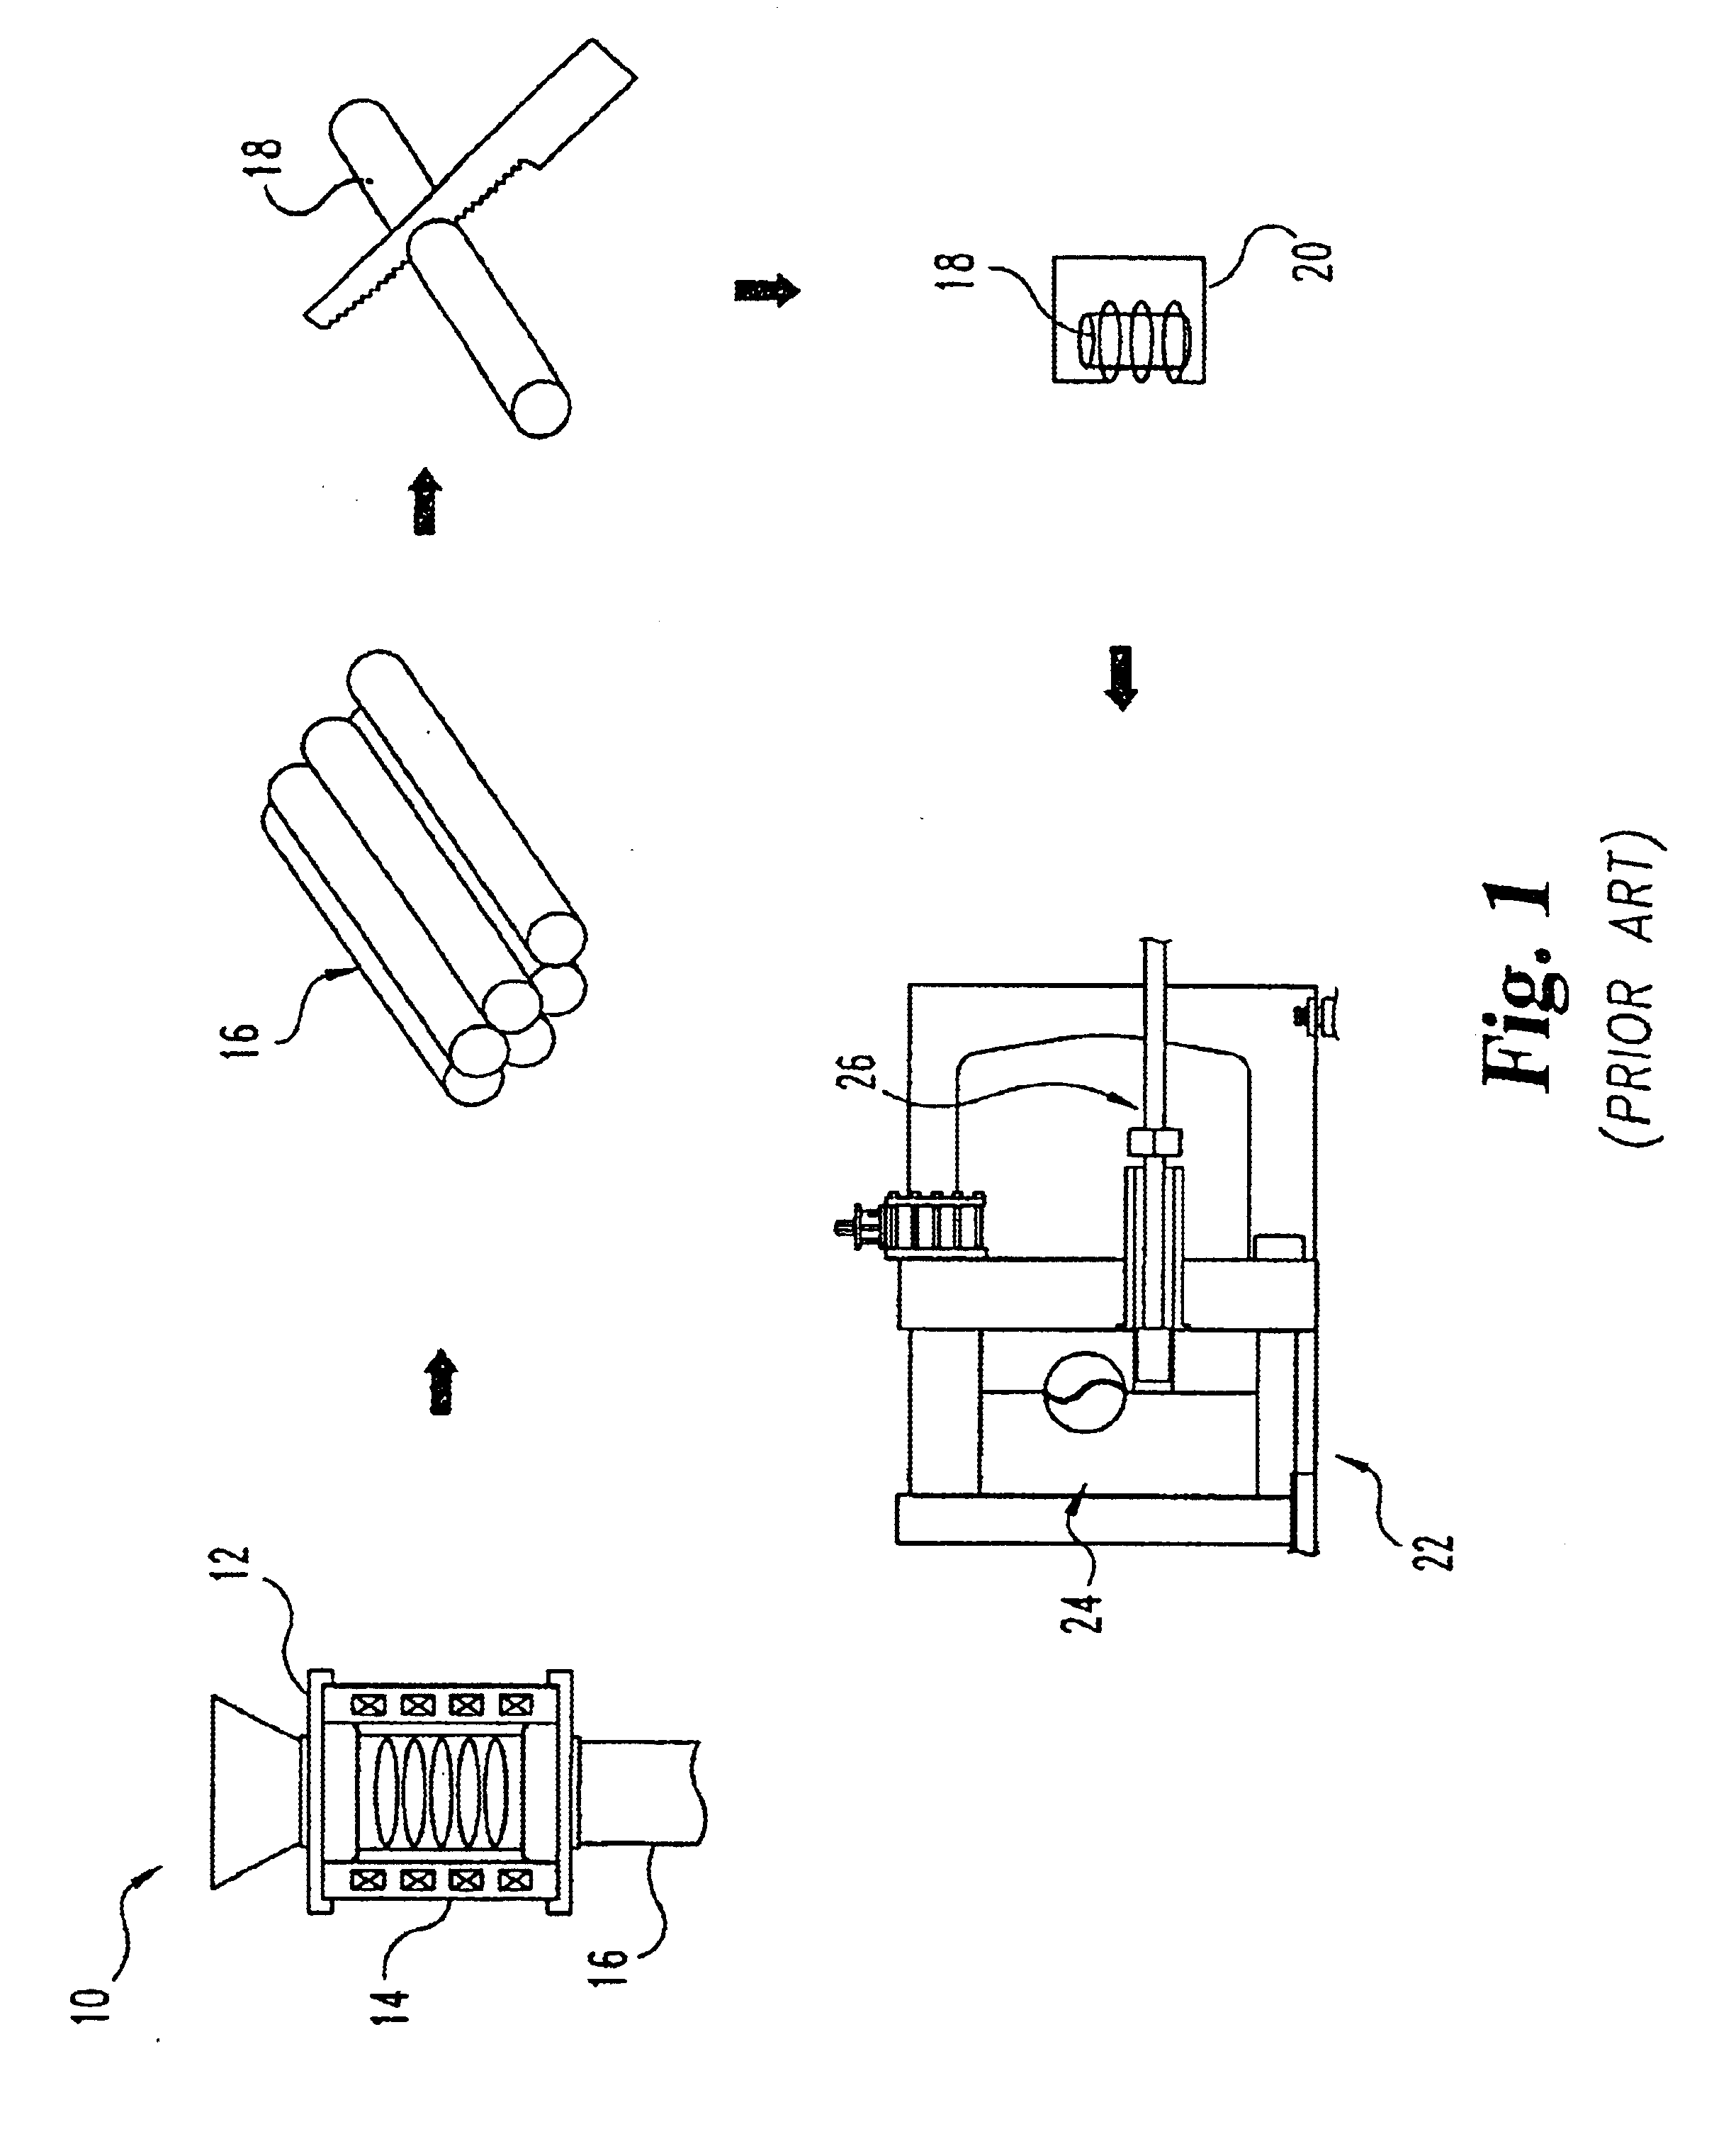 Apparatus for and method of producing on-demand semi-solid material for castings